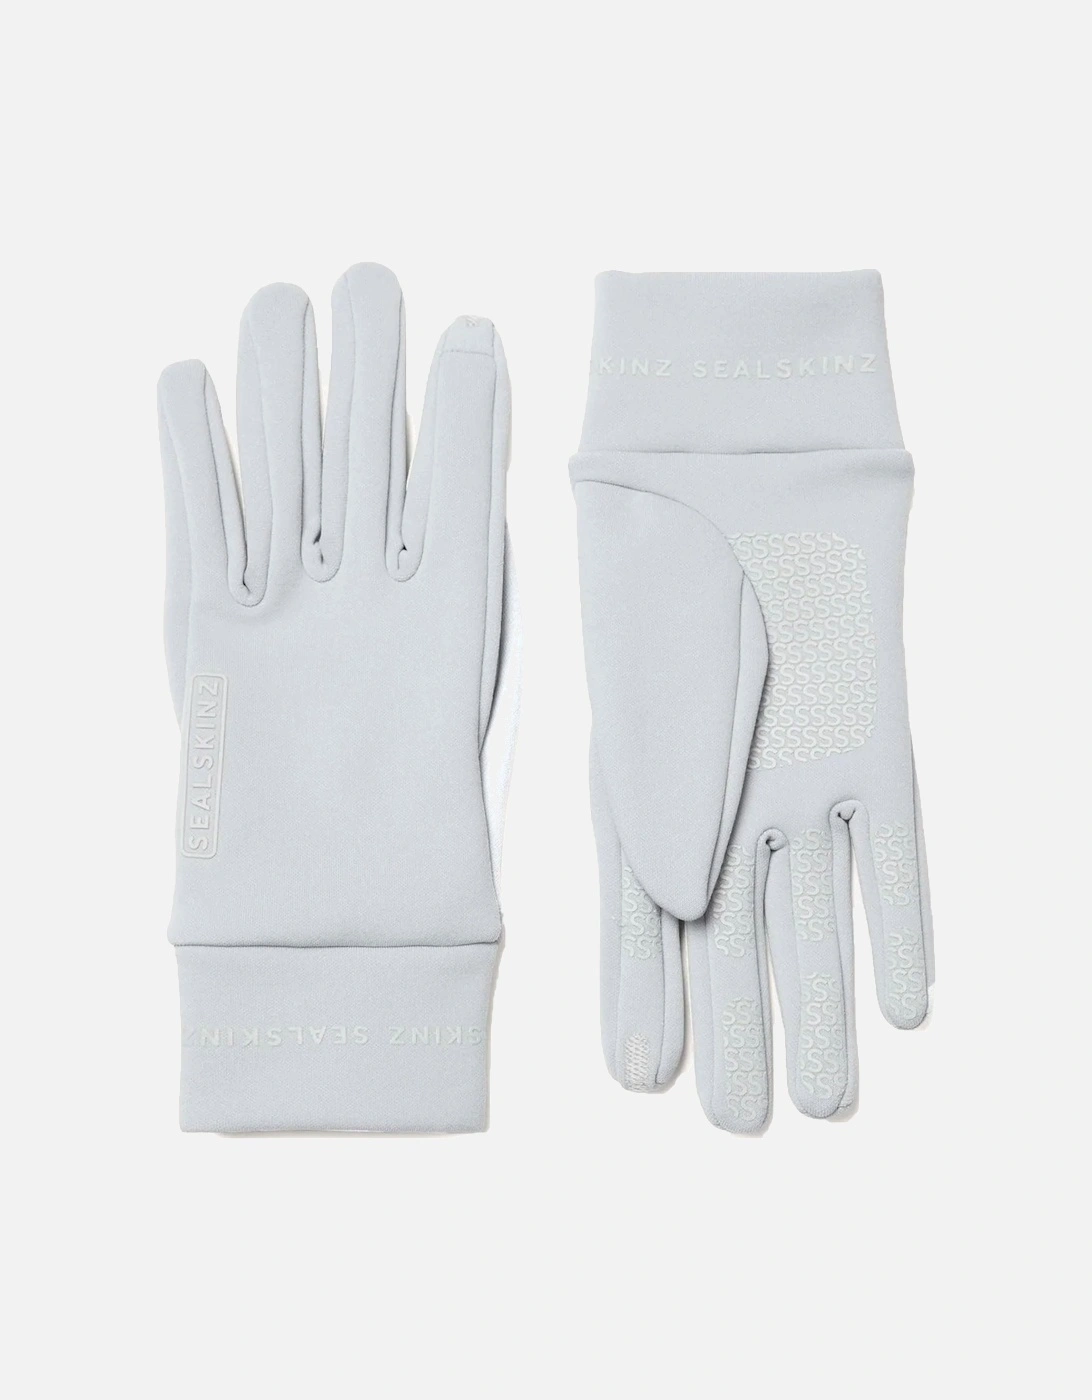 Womens Acle Water Repellent Nano Fleece Gloves